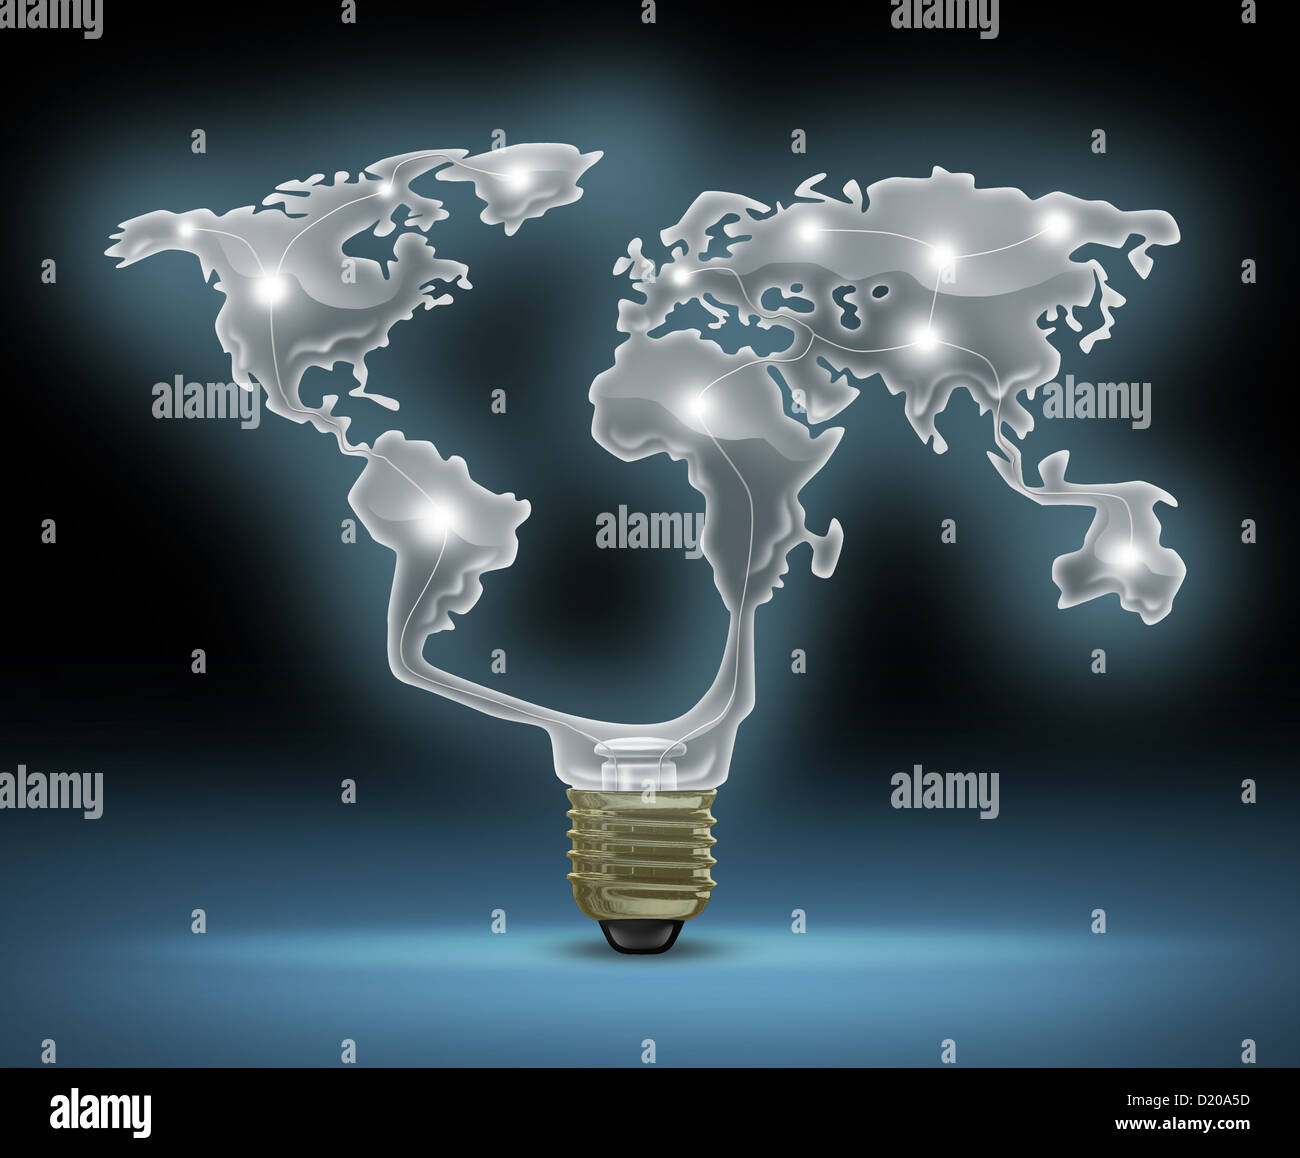 Global innovation symbol with a glowing glass light bulb shaped as the world map representing the business concept of new and future inventions in international technology and design creativity. Stock Photo